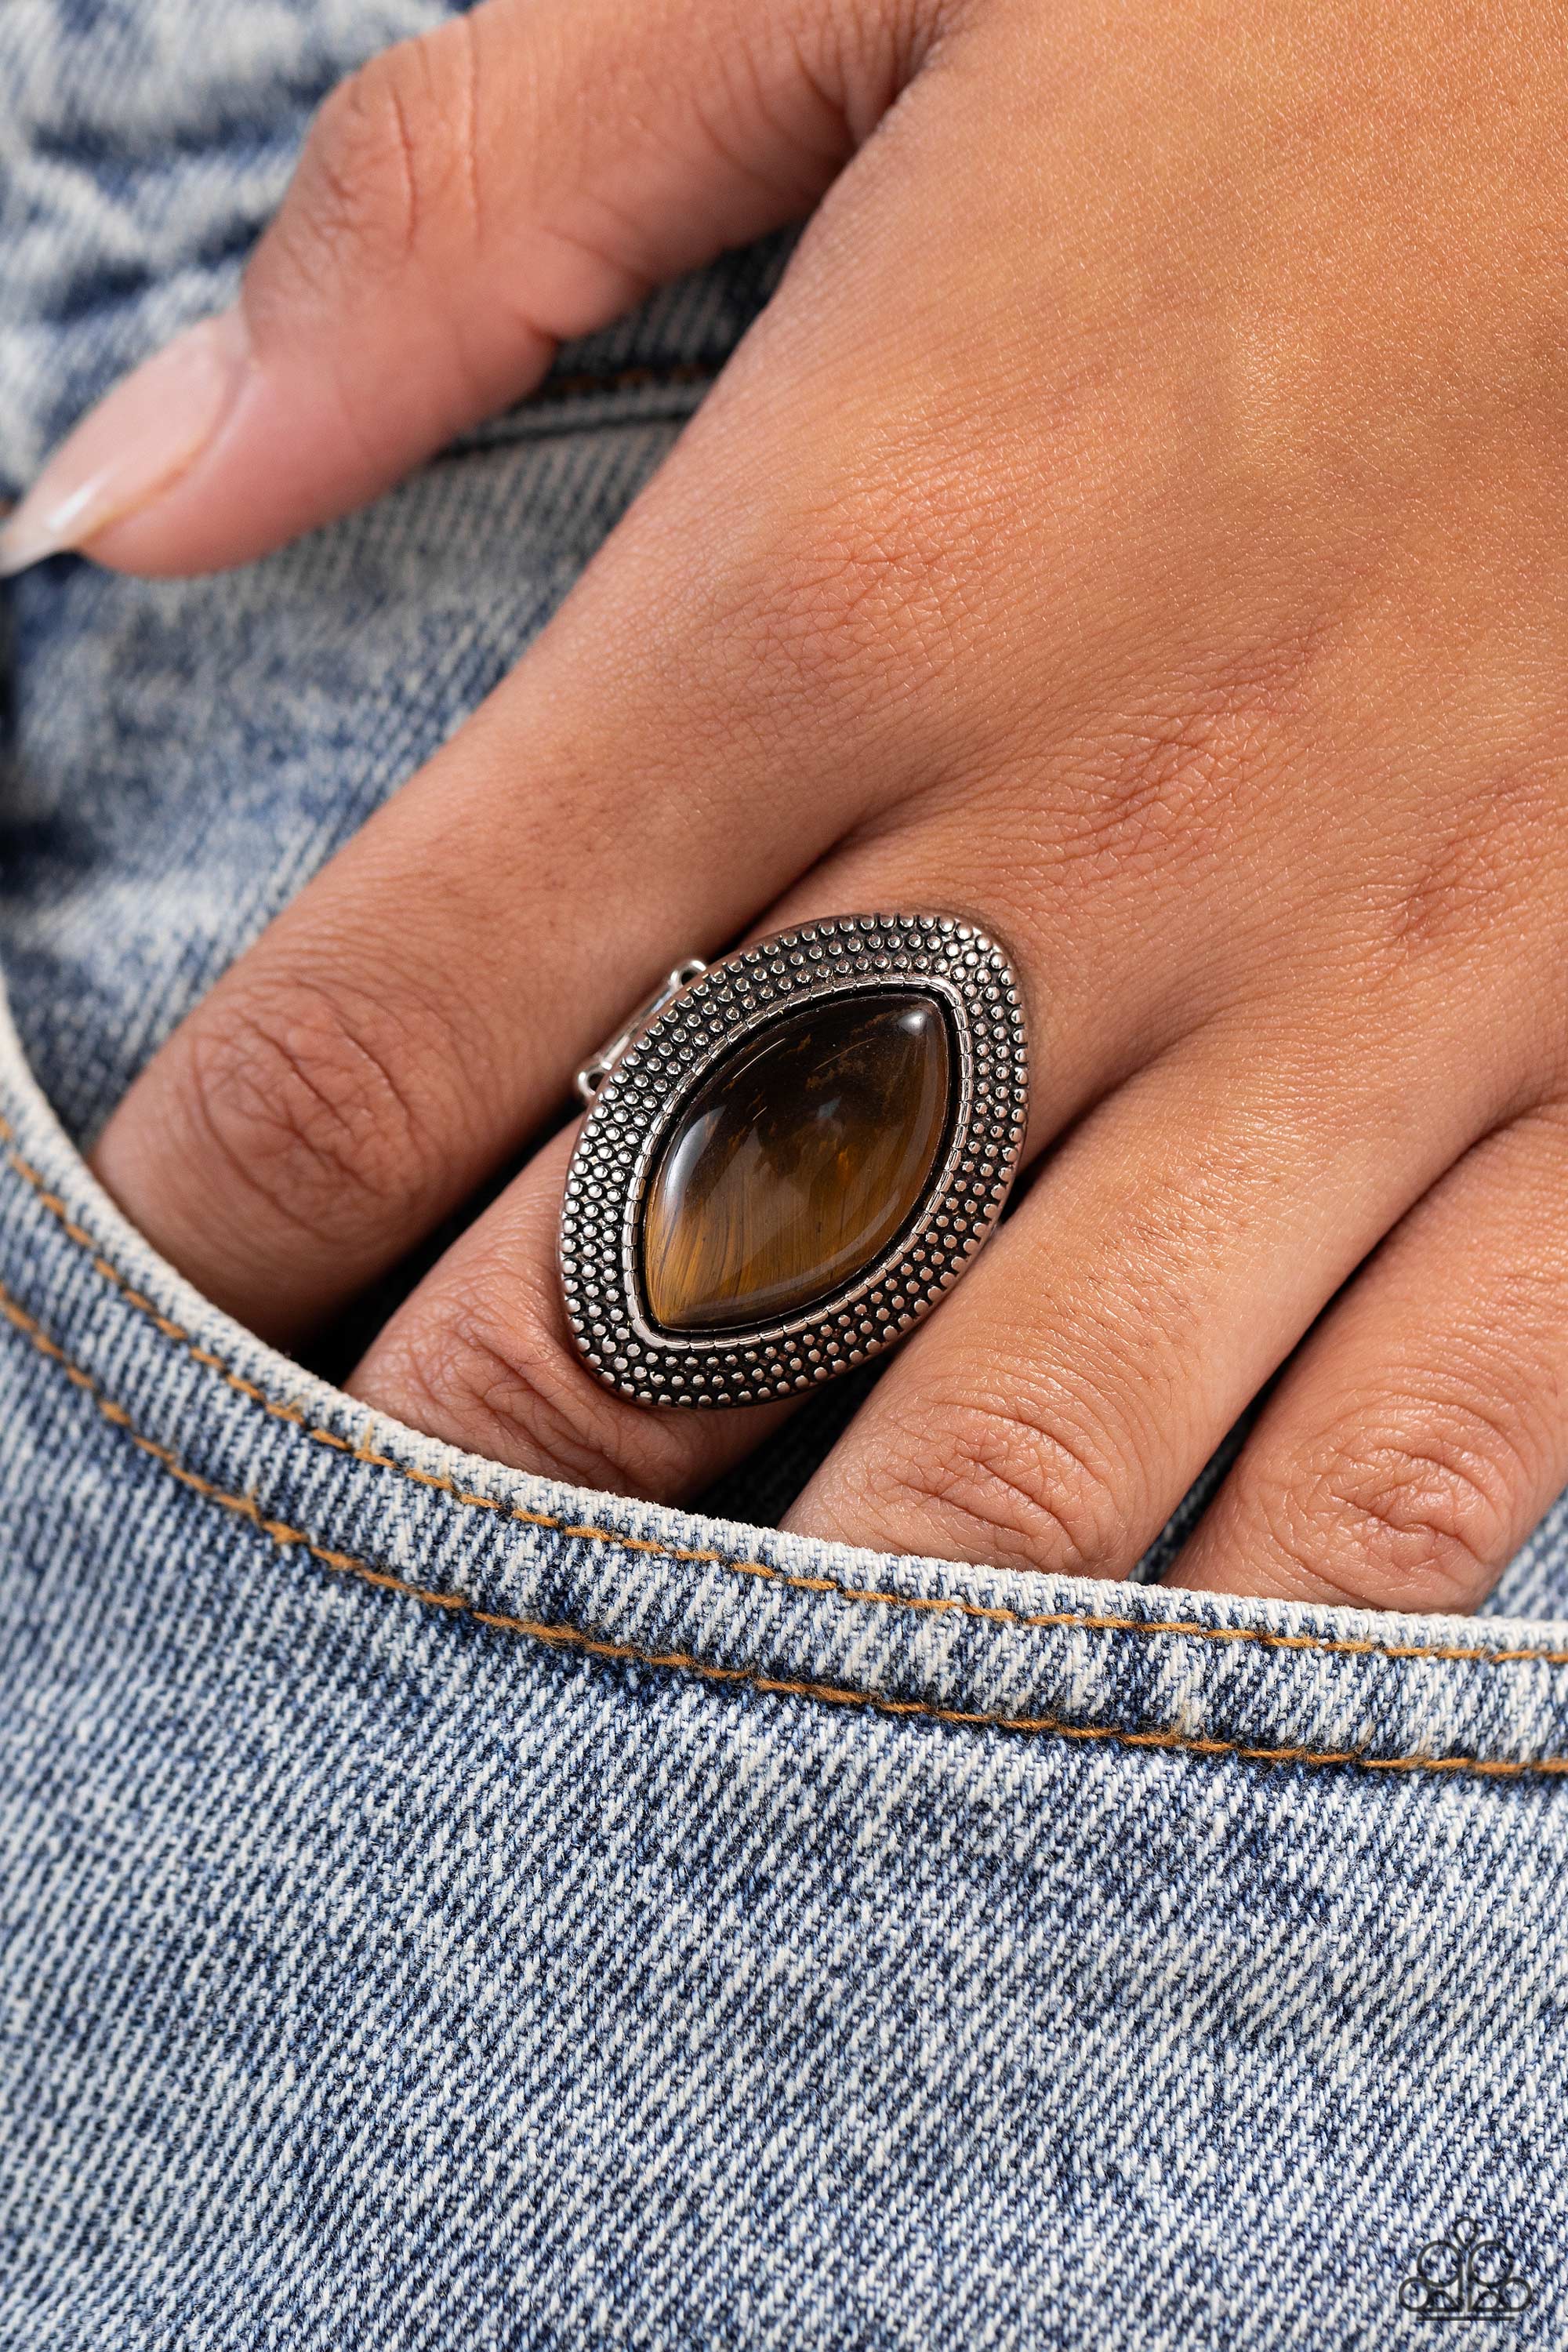 Artisanal Apothecary Brown Tiger's Eye Stone Ring - Paparazzi Accessories- lightbox - CarasShop.com - $5 Jewelry by Cara Jewels